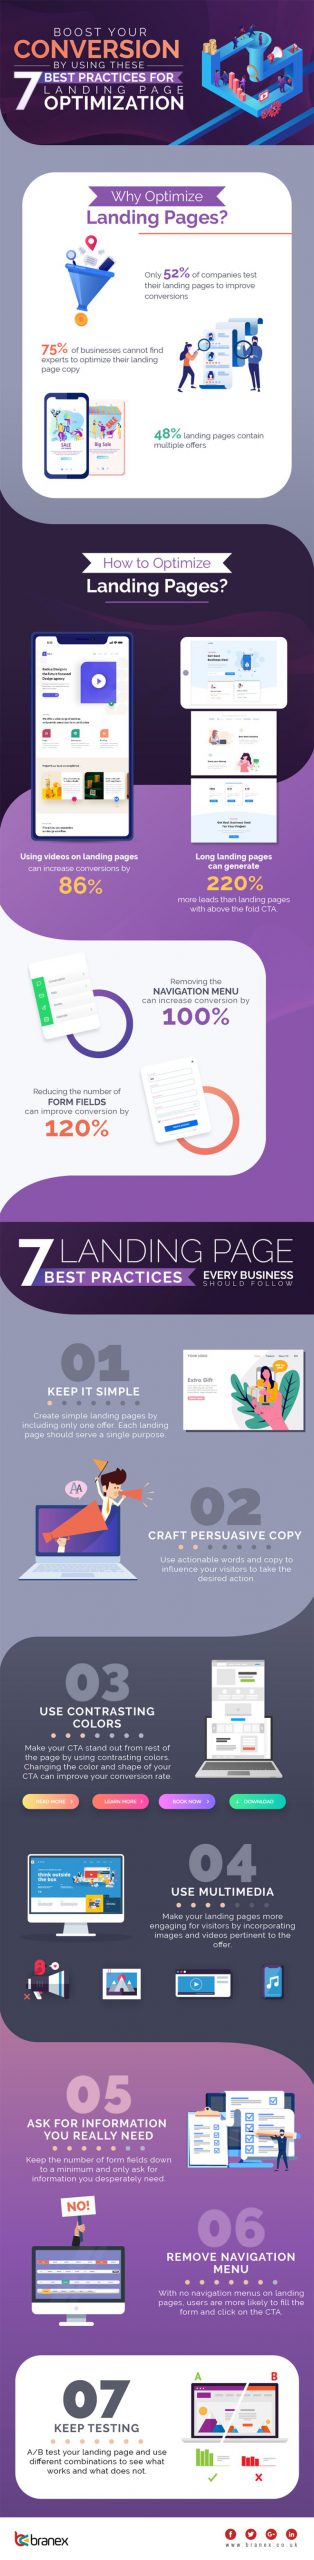 7 landing page best practices to improve your website conversion rate infographic scaled 1